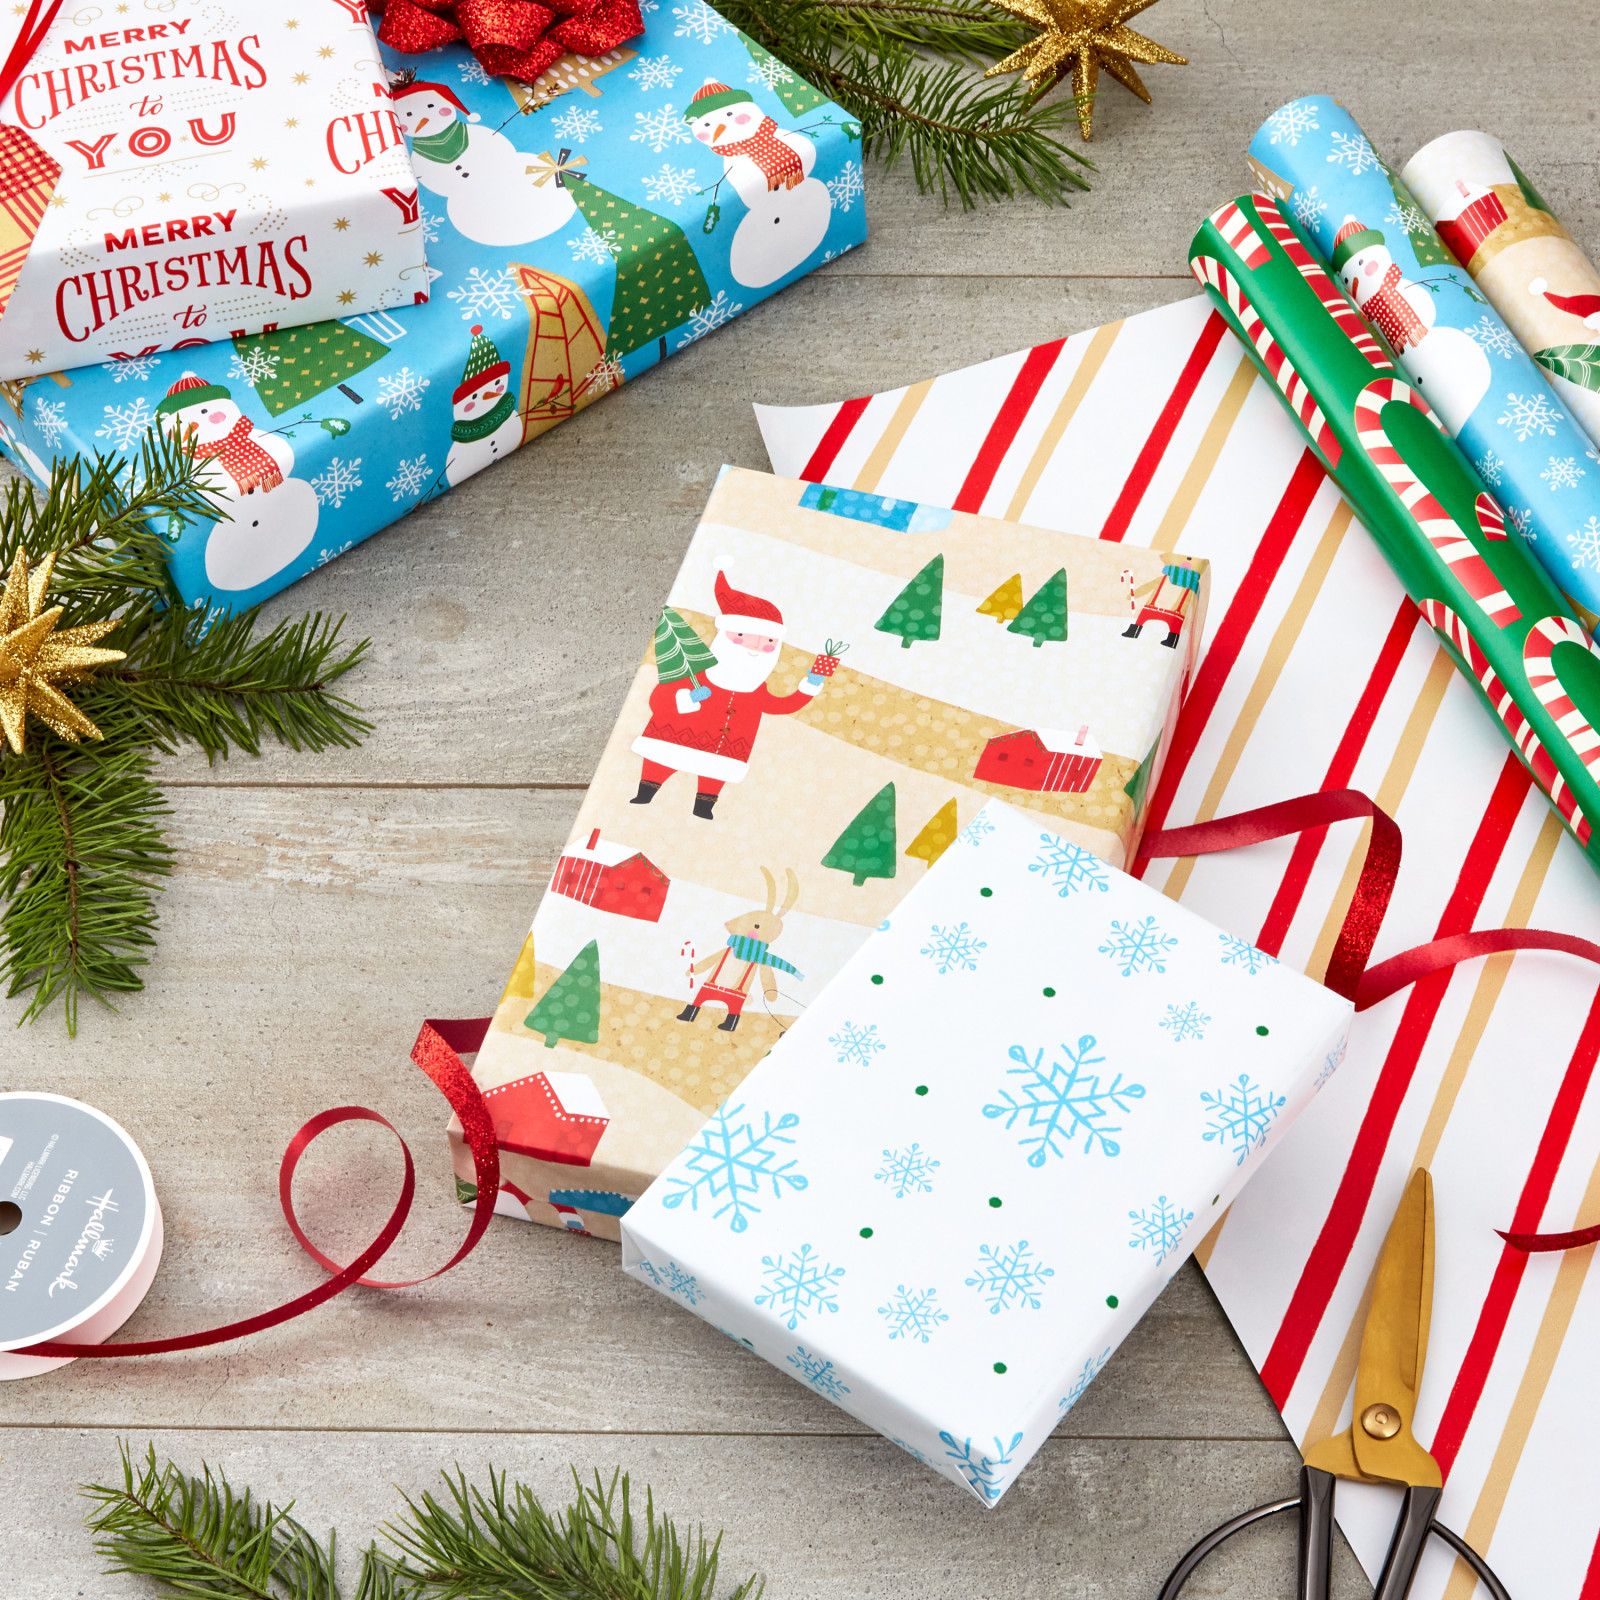 Lowest Price: Hallmark Holiday Wrapping Paper with Cut